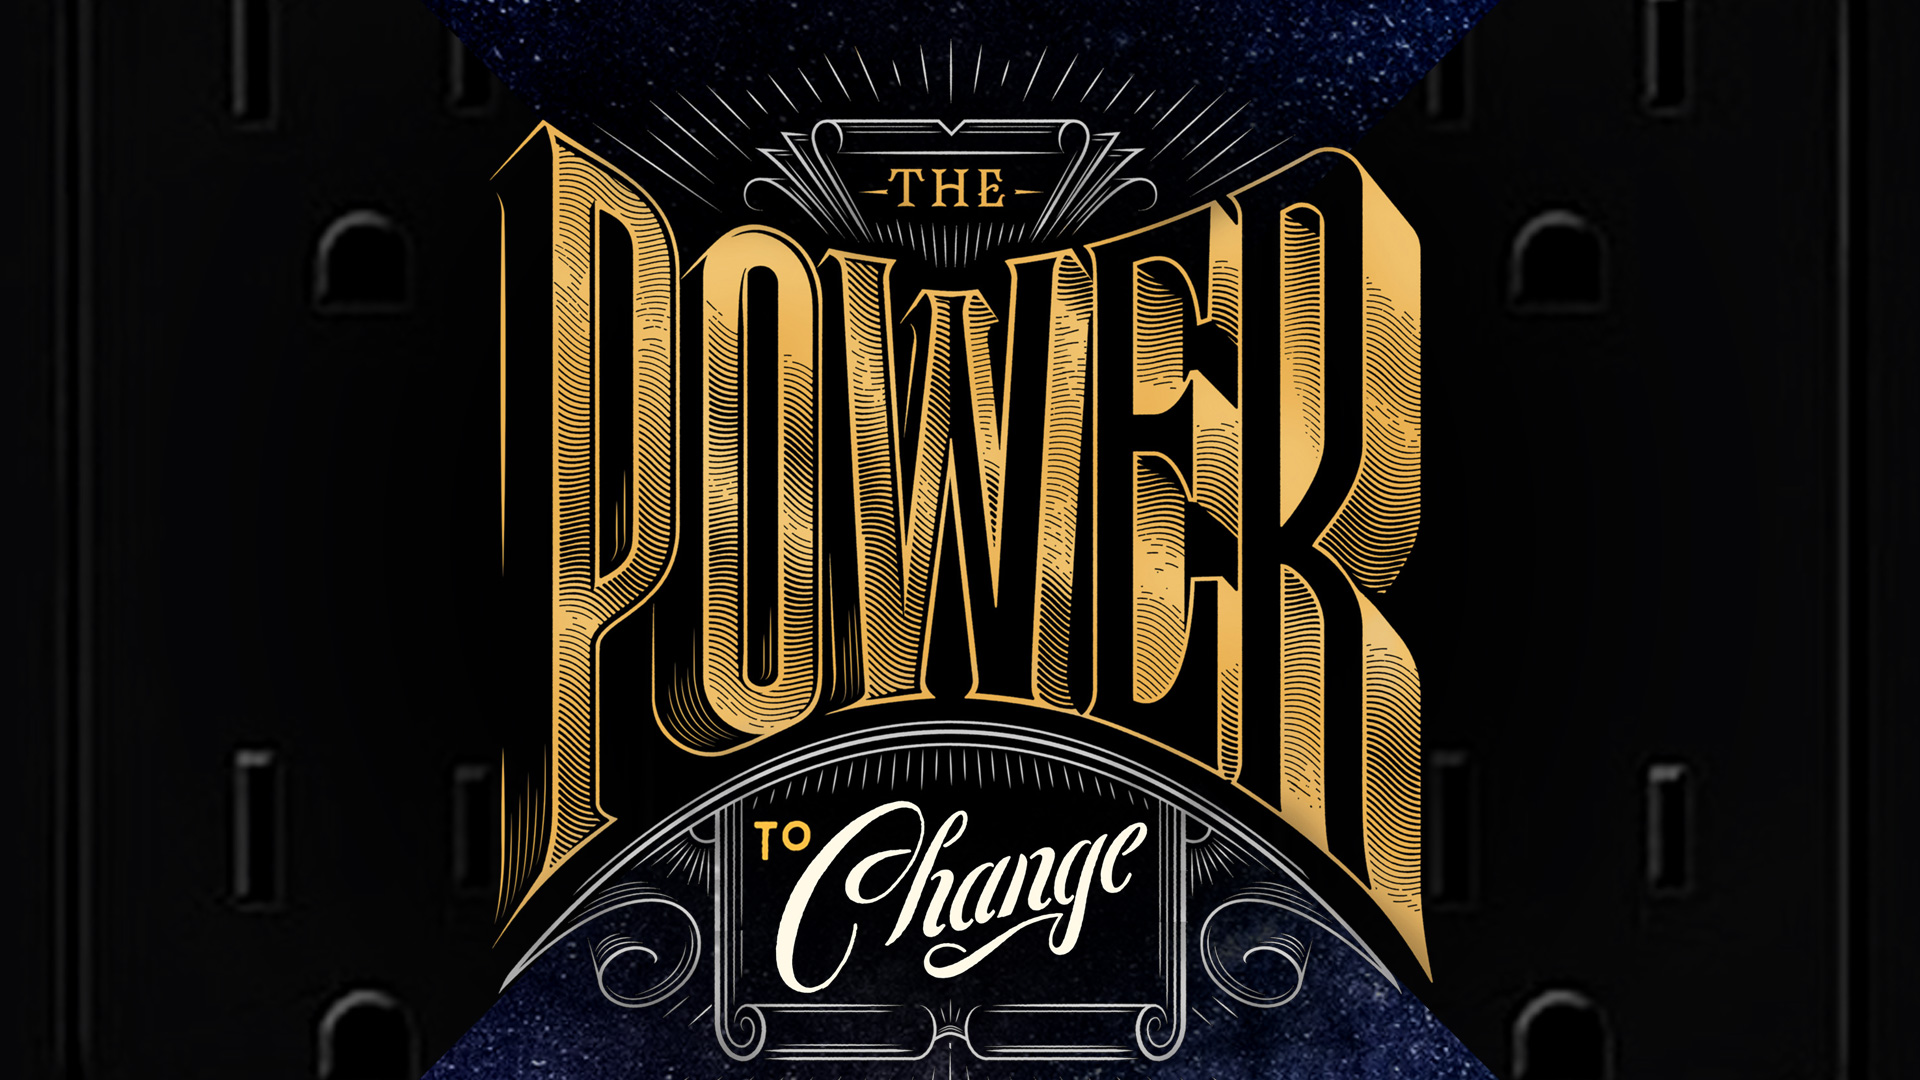 The Power To Change - Morgan Ervin